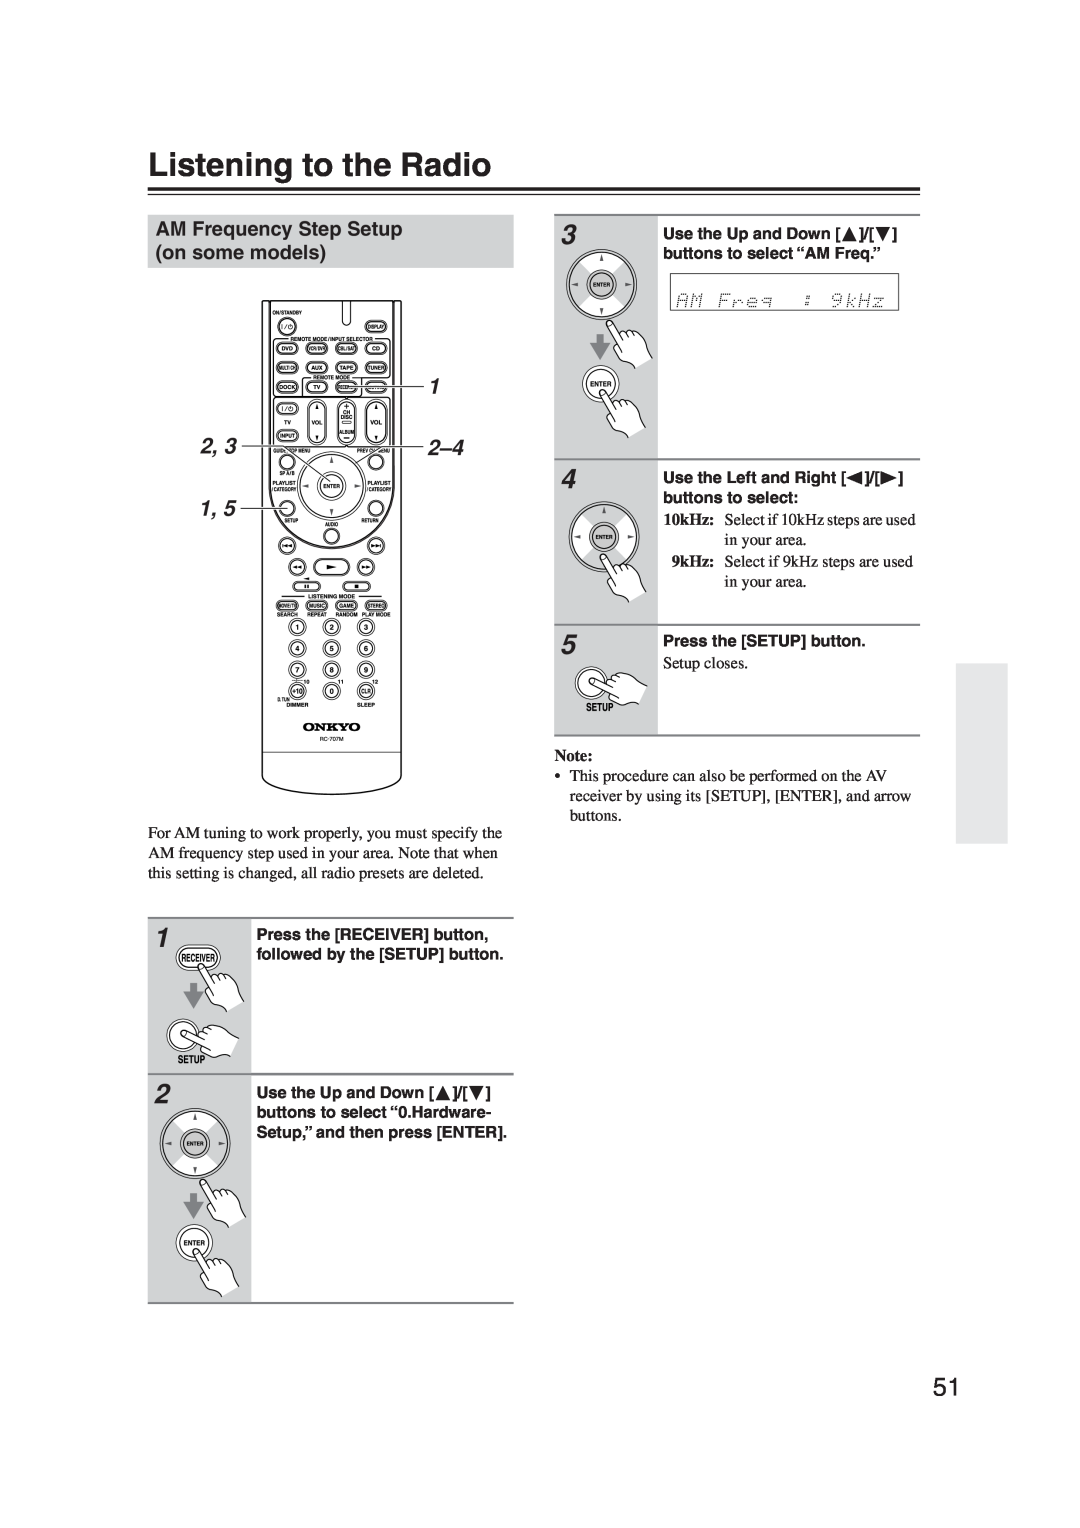 Onkyo S5100 instruction manual Listening to the Radio, 1 2, 32–4 1, AM Frequency Step Setup on some models, Setup closes 